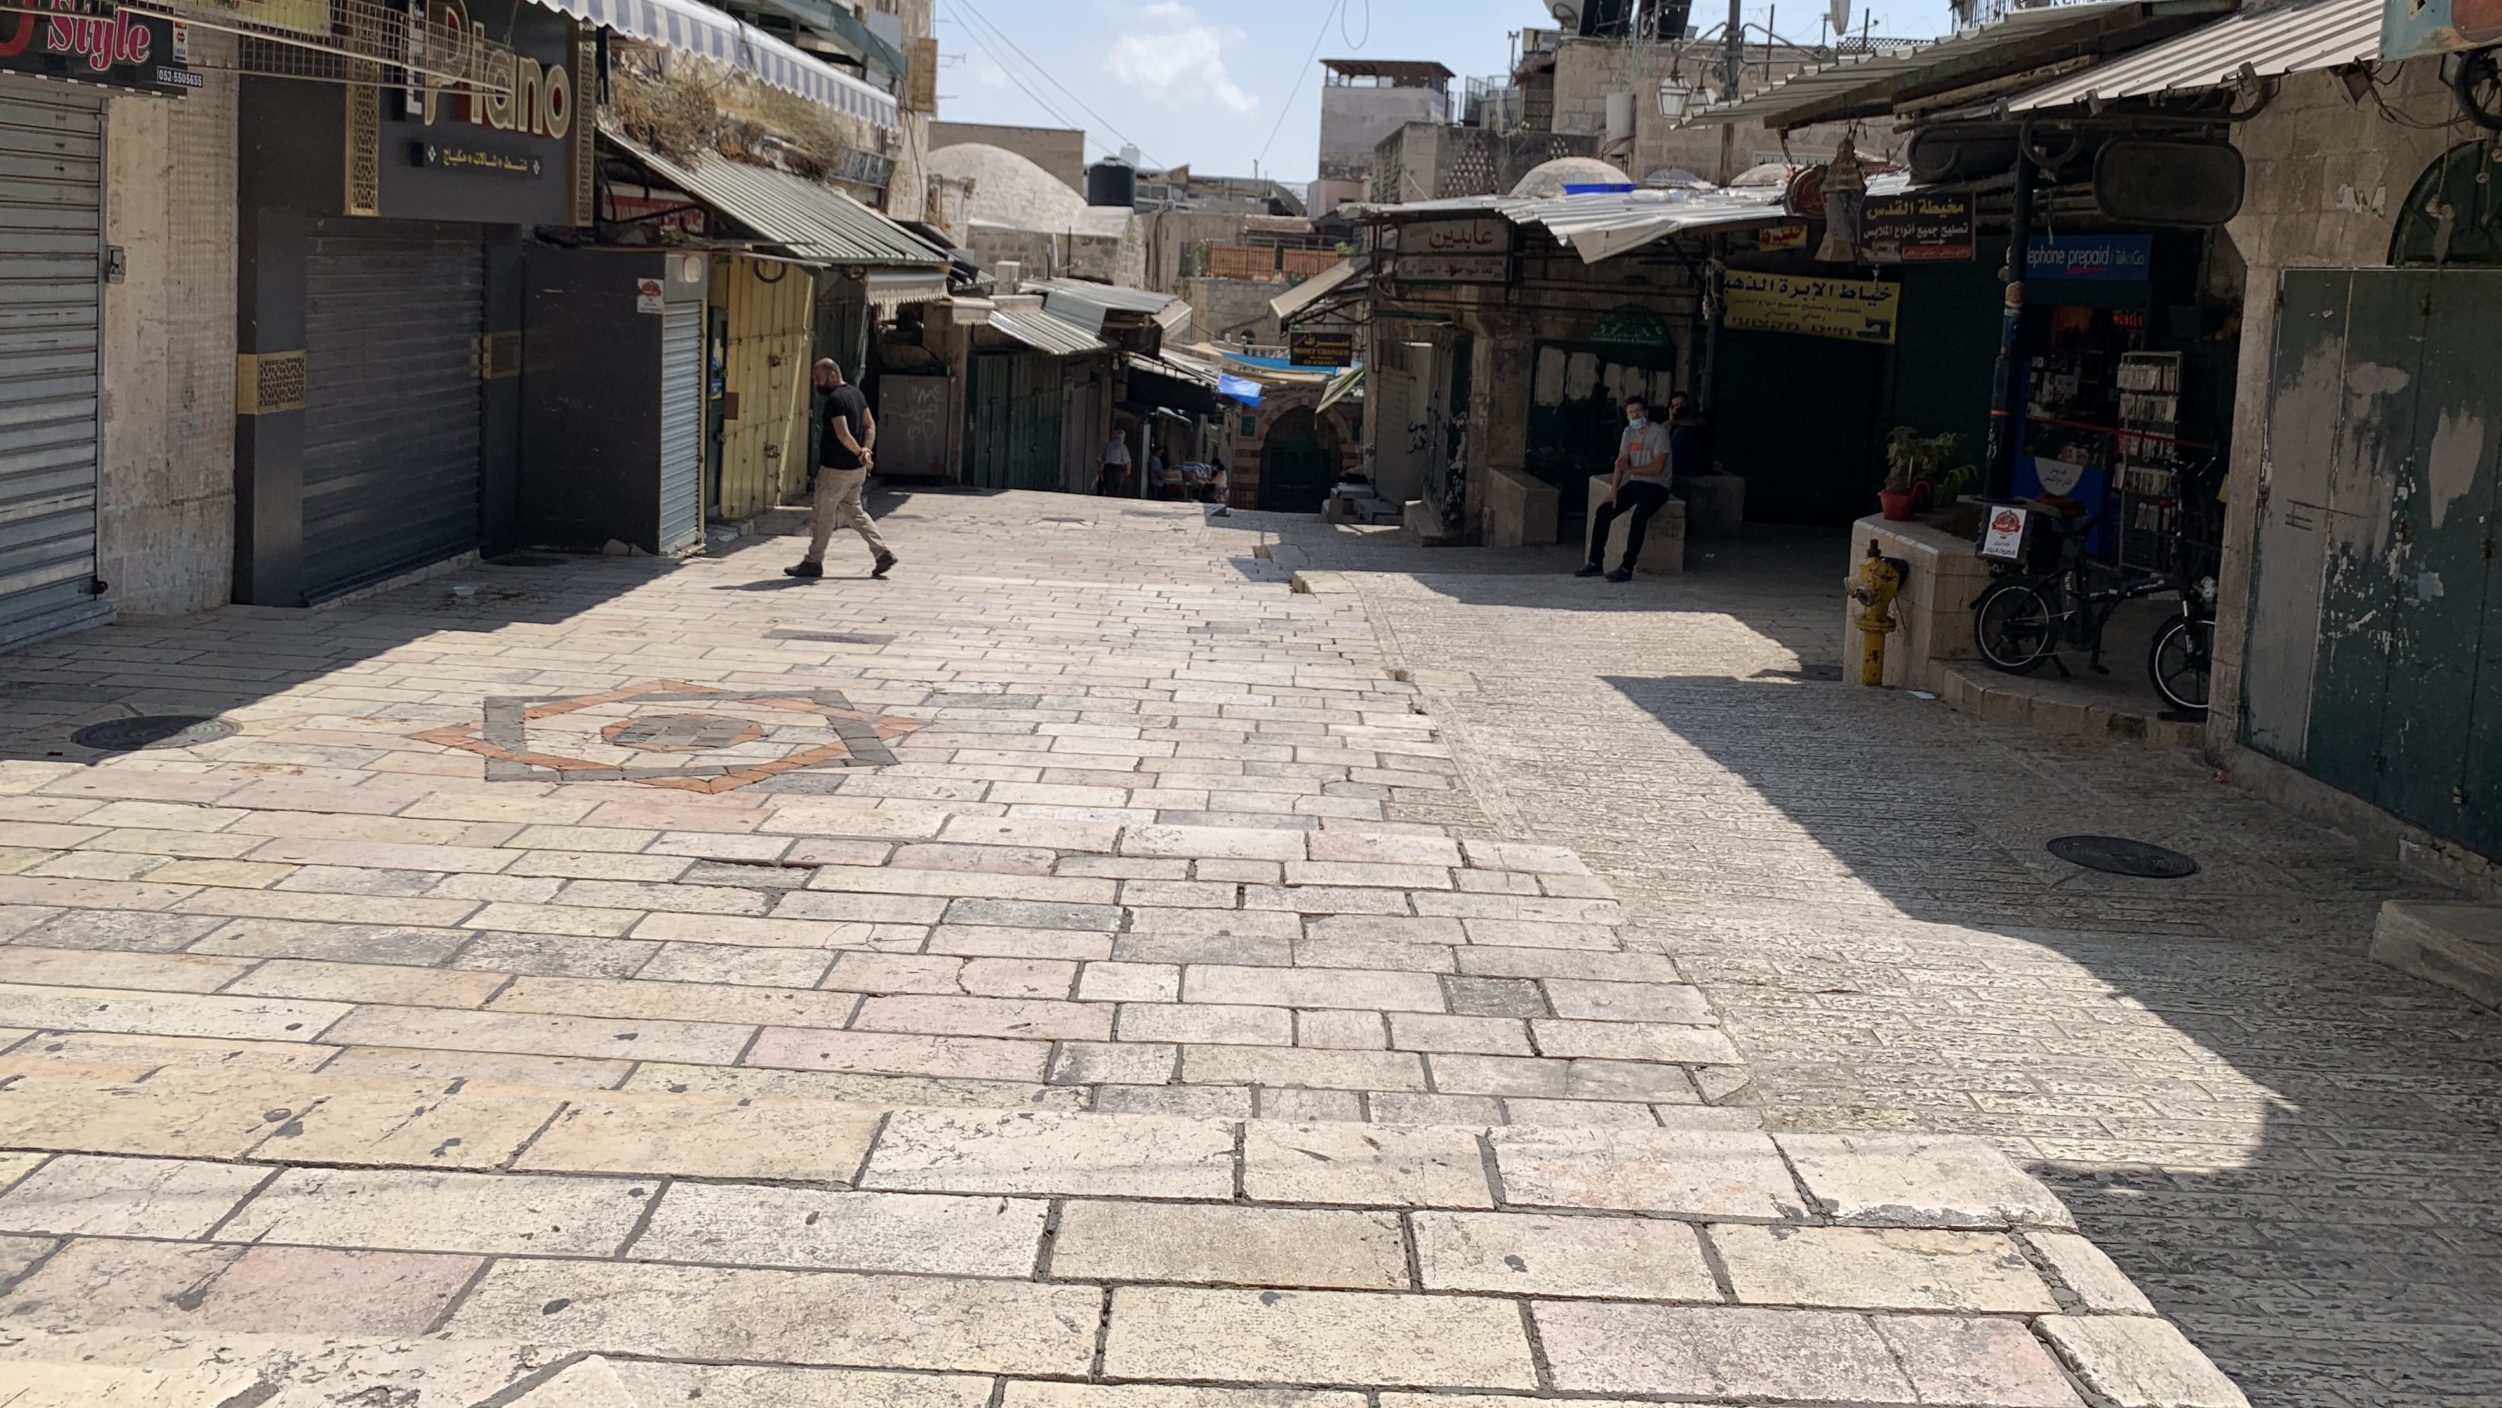 Jerusalem Old City Merchants: Pandemic Restrictions Ruining Us (with VIDEO REPORT)